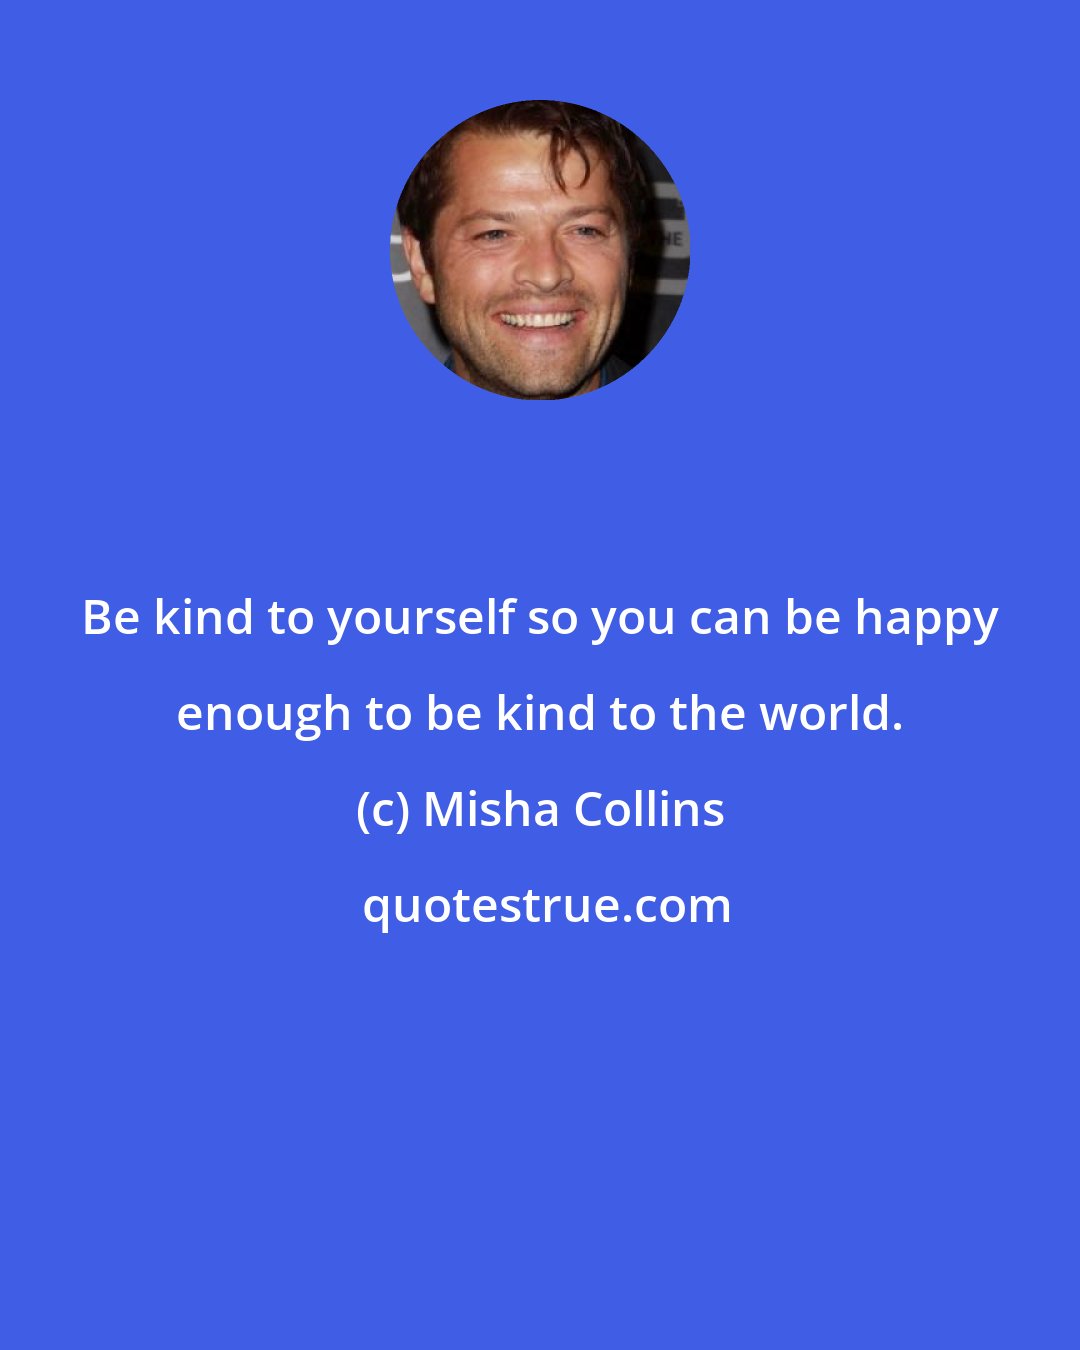 Misha Collins: Be kind to yourself so you can be happy enough to be kind to the world.